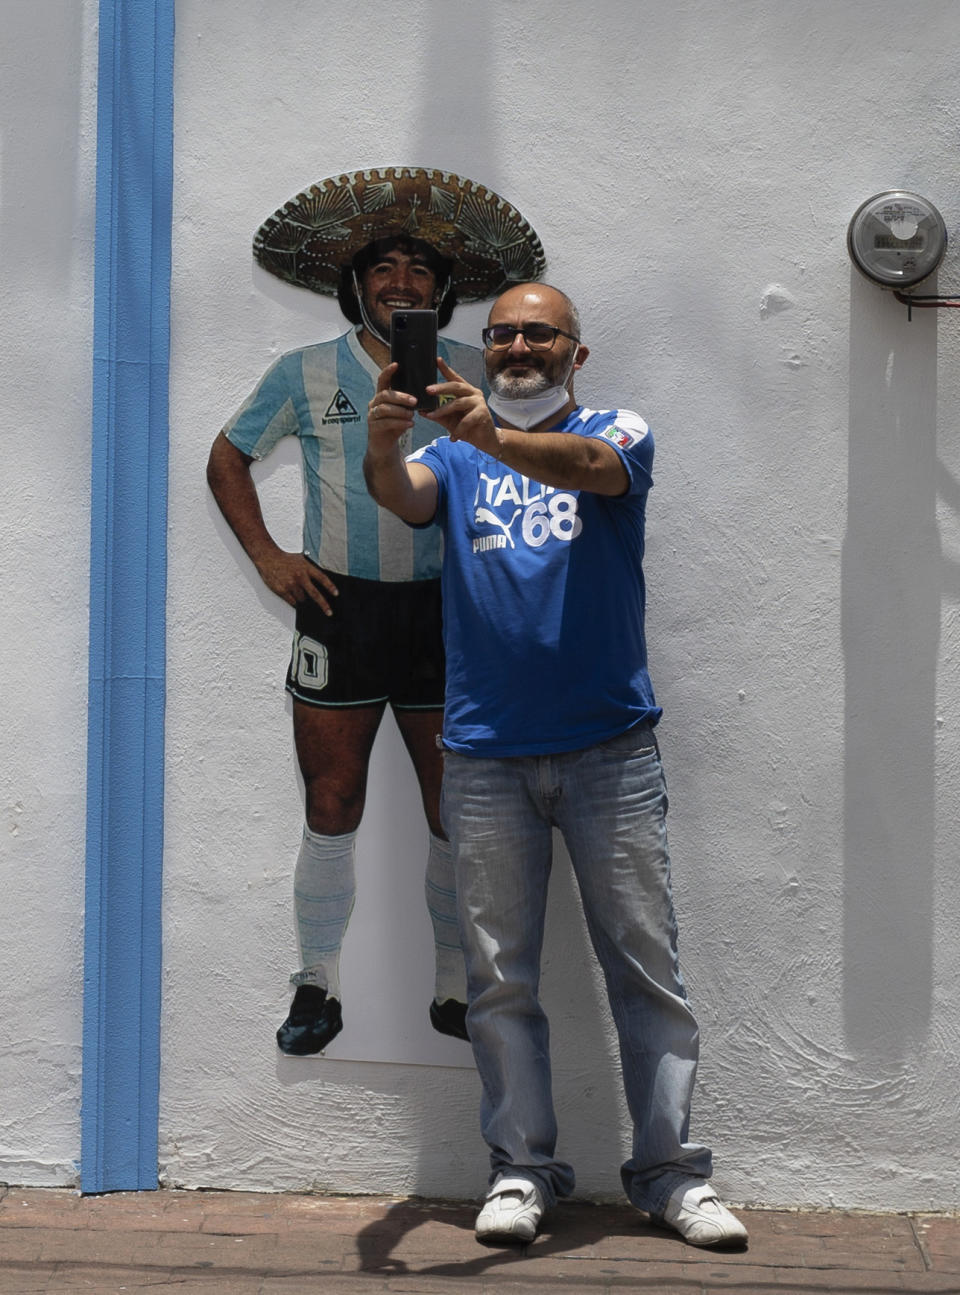 A tourist takes a selfie in front of the Church of Maradona in San Andres Cholula, Puebla state, Mexico, Sunday, July 18, 2021. The Church of Maradona in Mexico, dedicated to late soccer great Diego Armando Maradona, was founded a few weeks ago by Argentine expatriate Buchet, who also owns the pizza parlor next door. (AP Photo/Marco Ugarte)